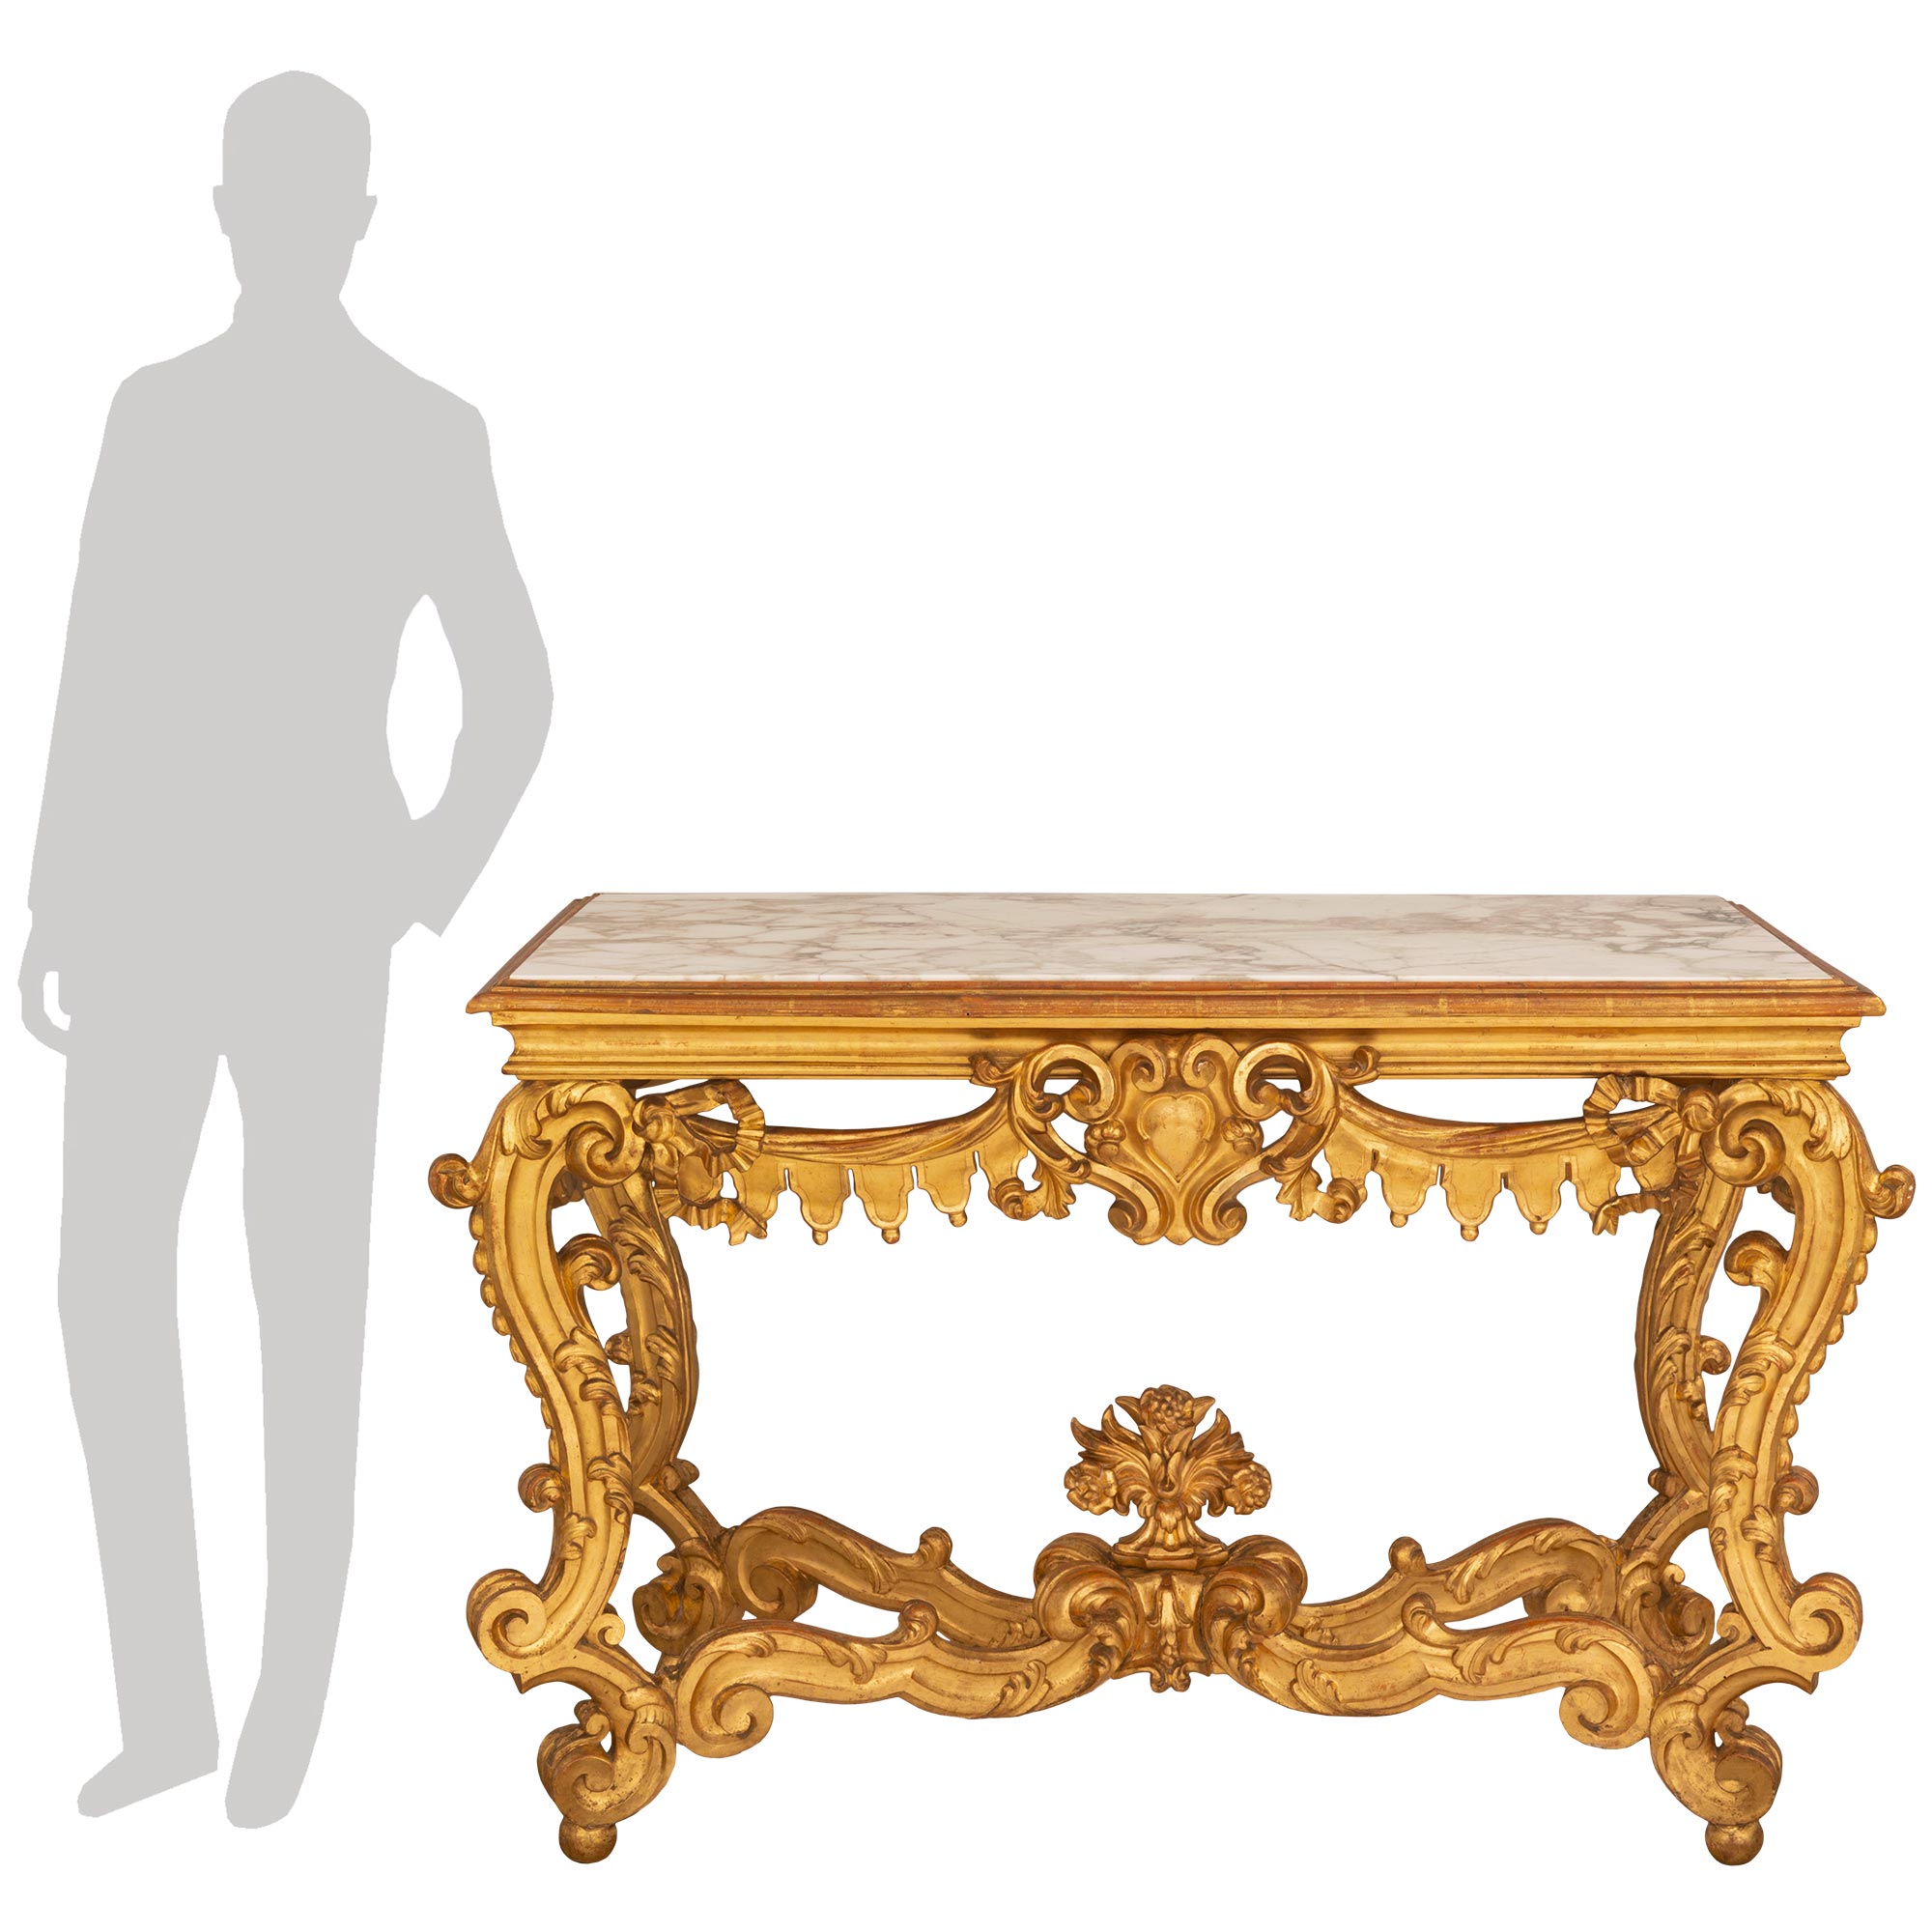 Italian Mid-19th Century Venetian Giltwood and Marble Freestanding Console